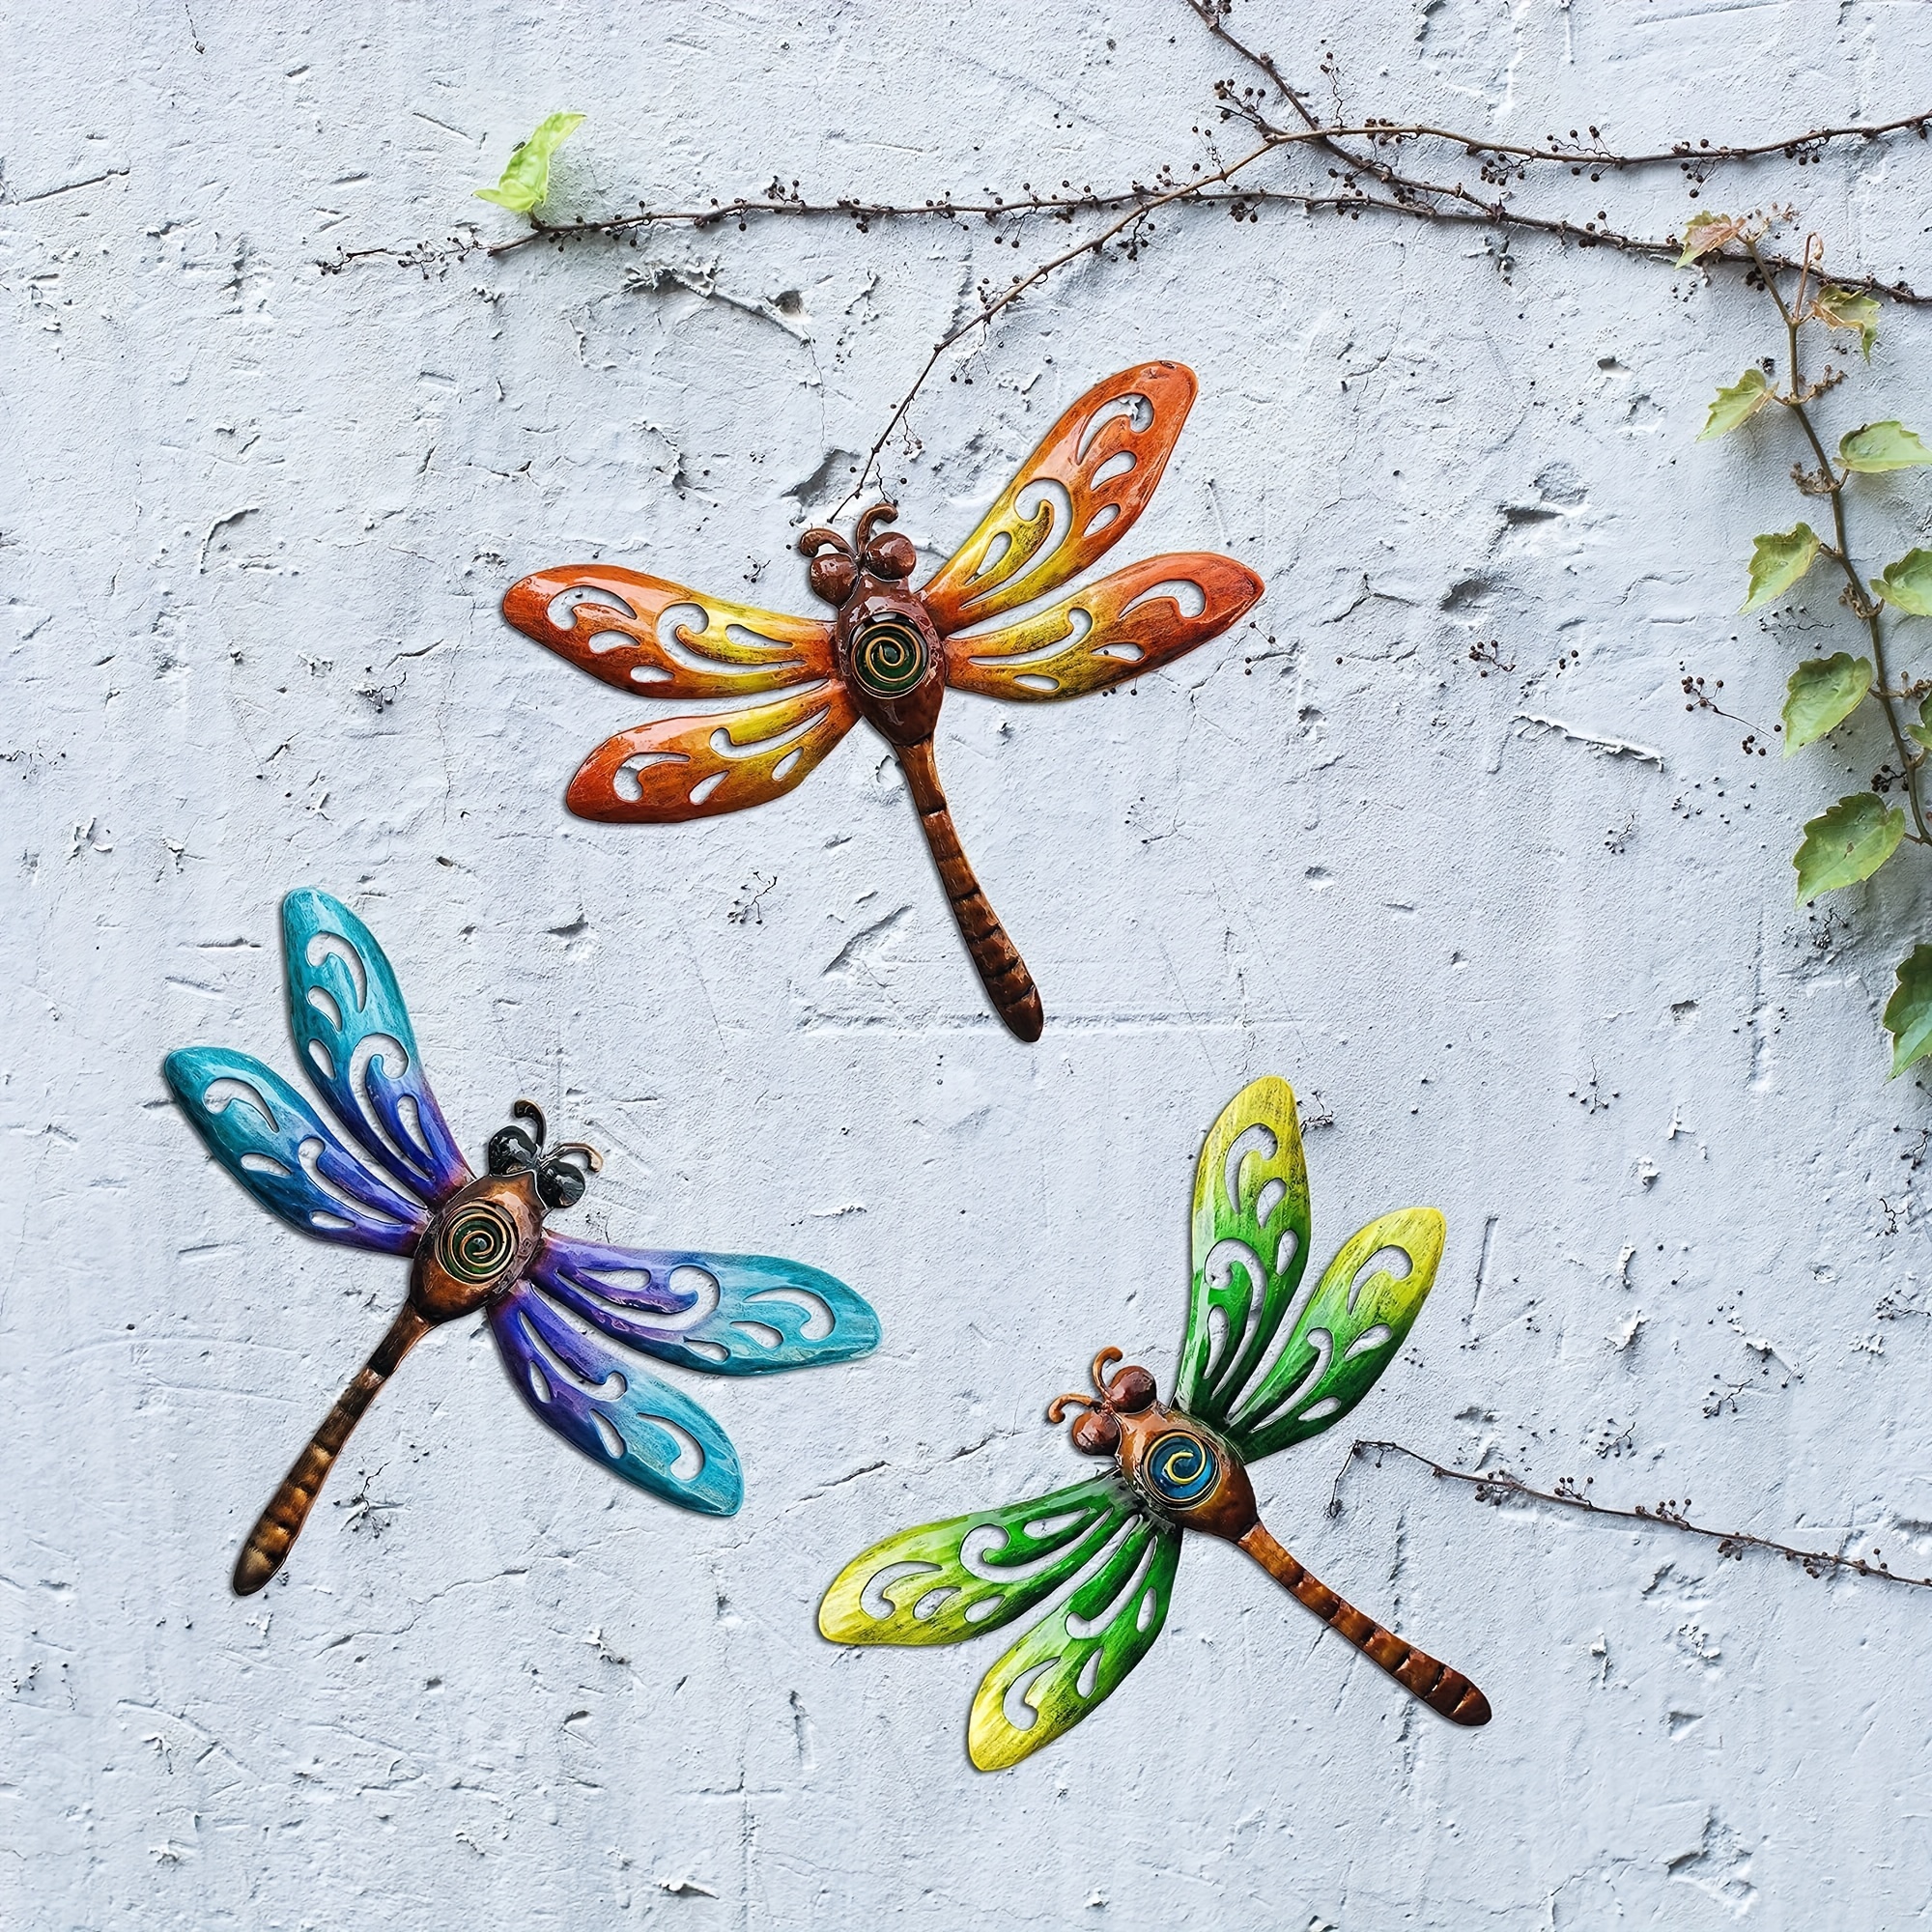 Beautiful Handmade Dragonfly Metal Wall Art - Perfect for Any Room or  Outdoor Space!